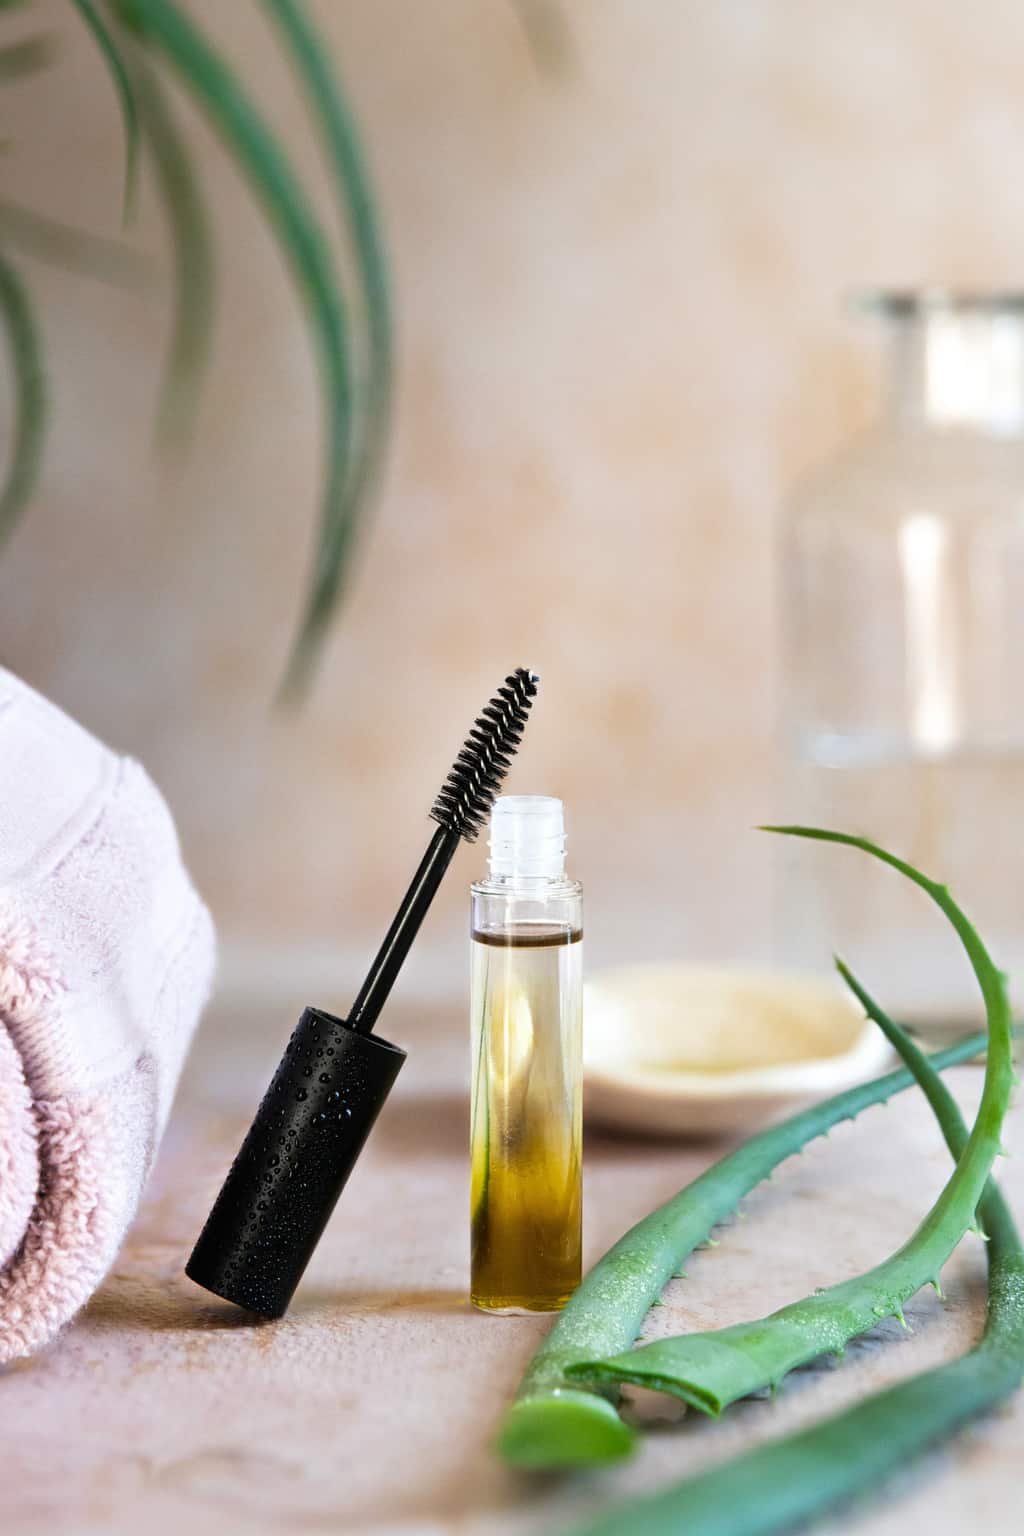 DIY lash conditioning serum nourishes and moisturizes lashes so they grow more quickly. Here's 3 ways to make your own at home.